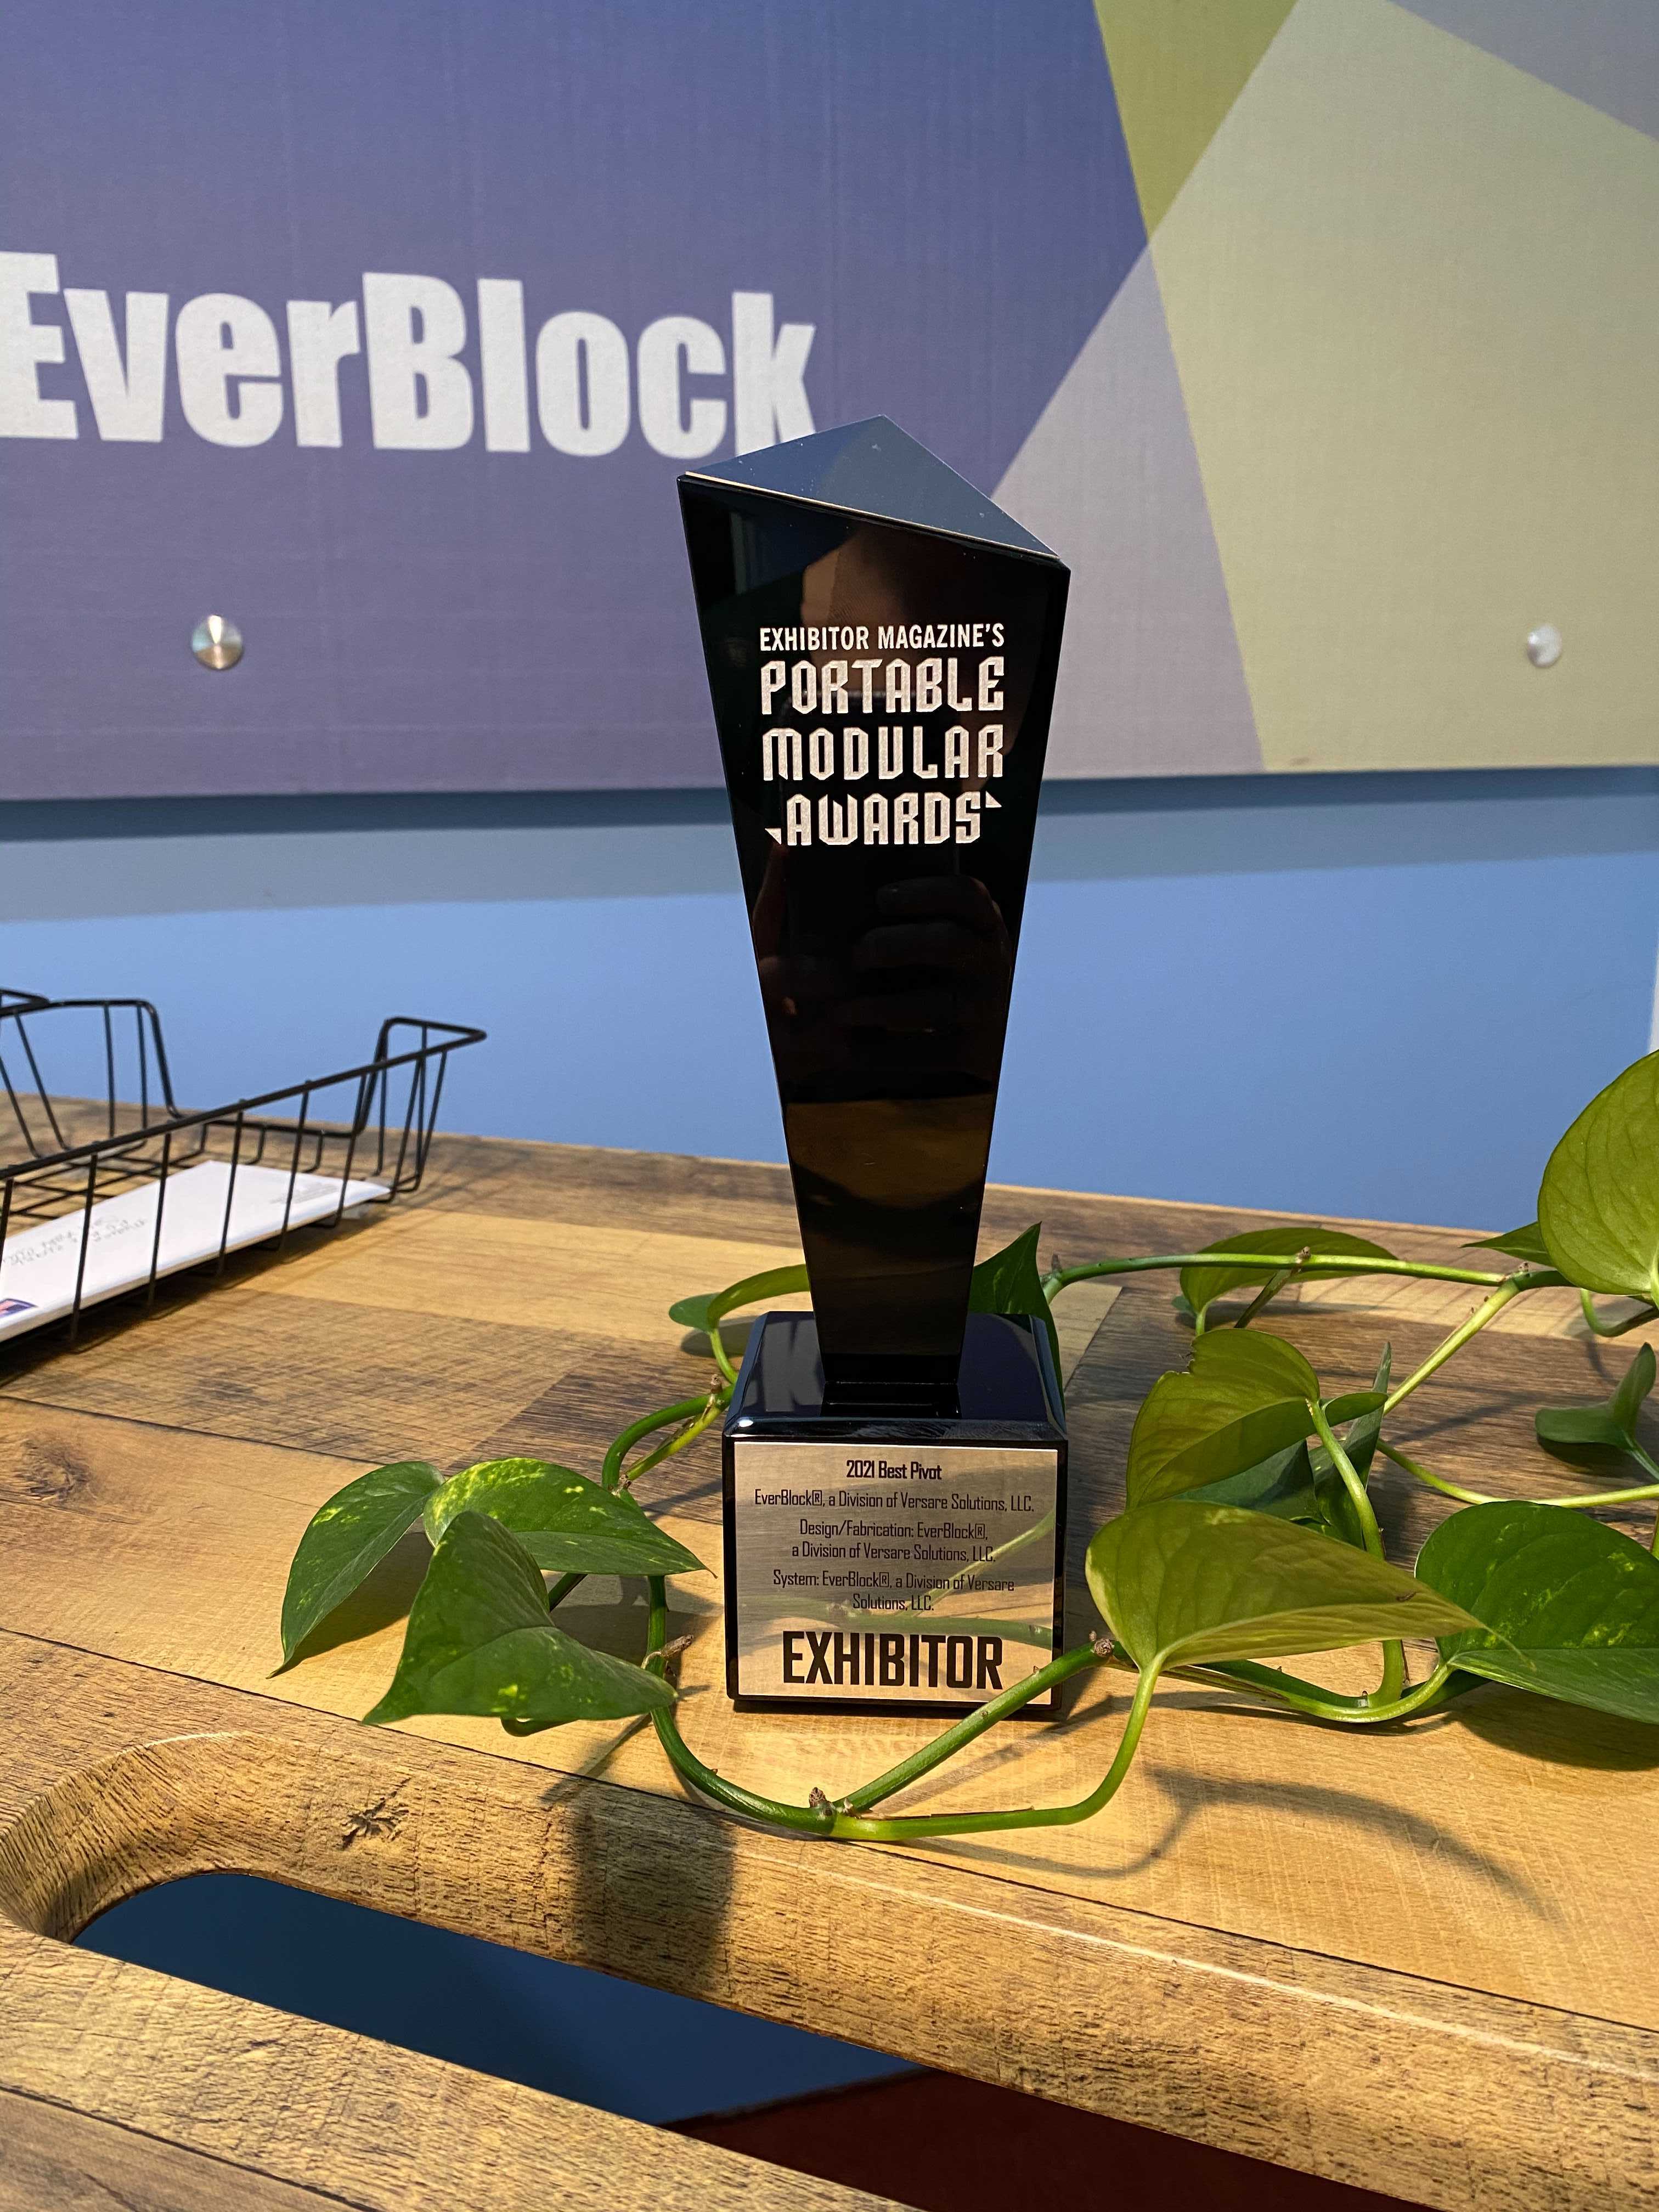 EverBlock wins the Best Pivot Award for 2020 by Exhibitor Magazine.